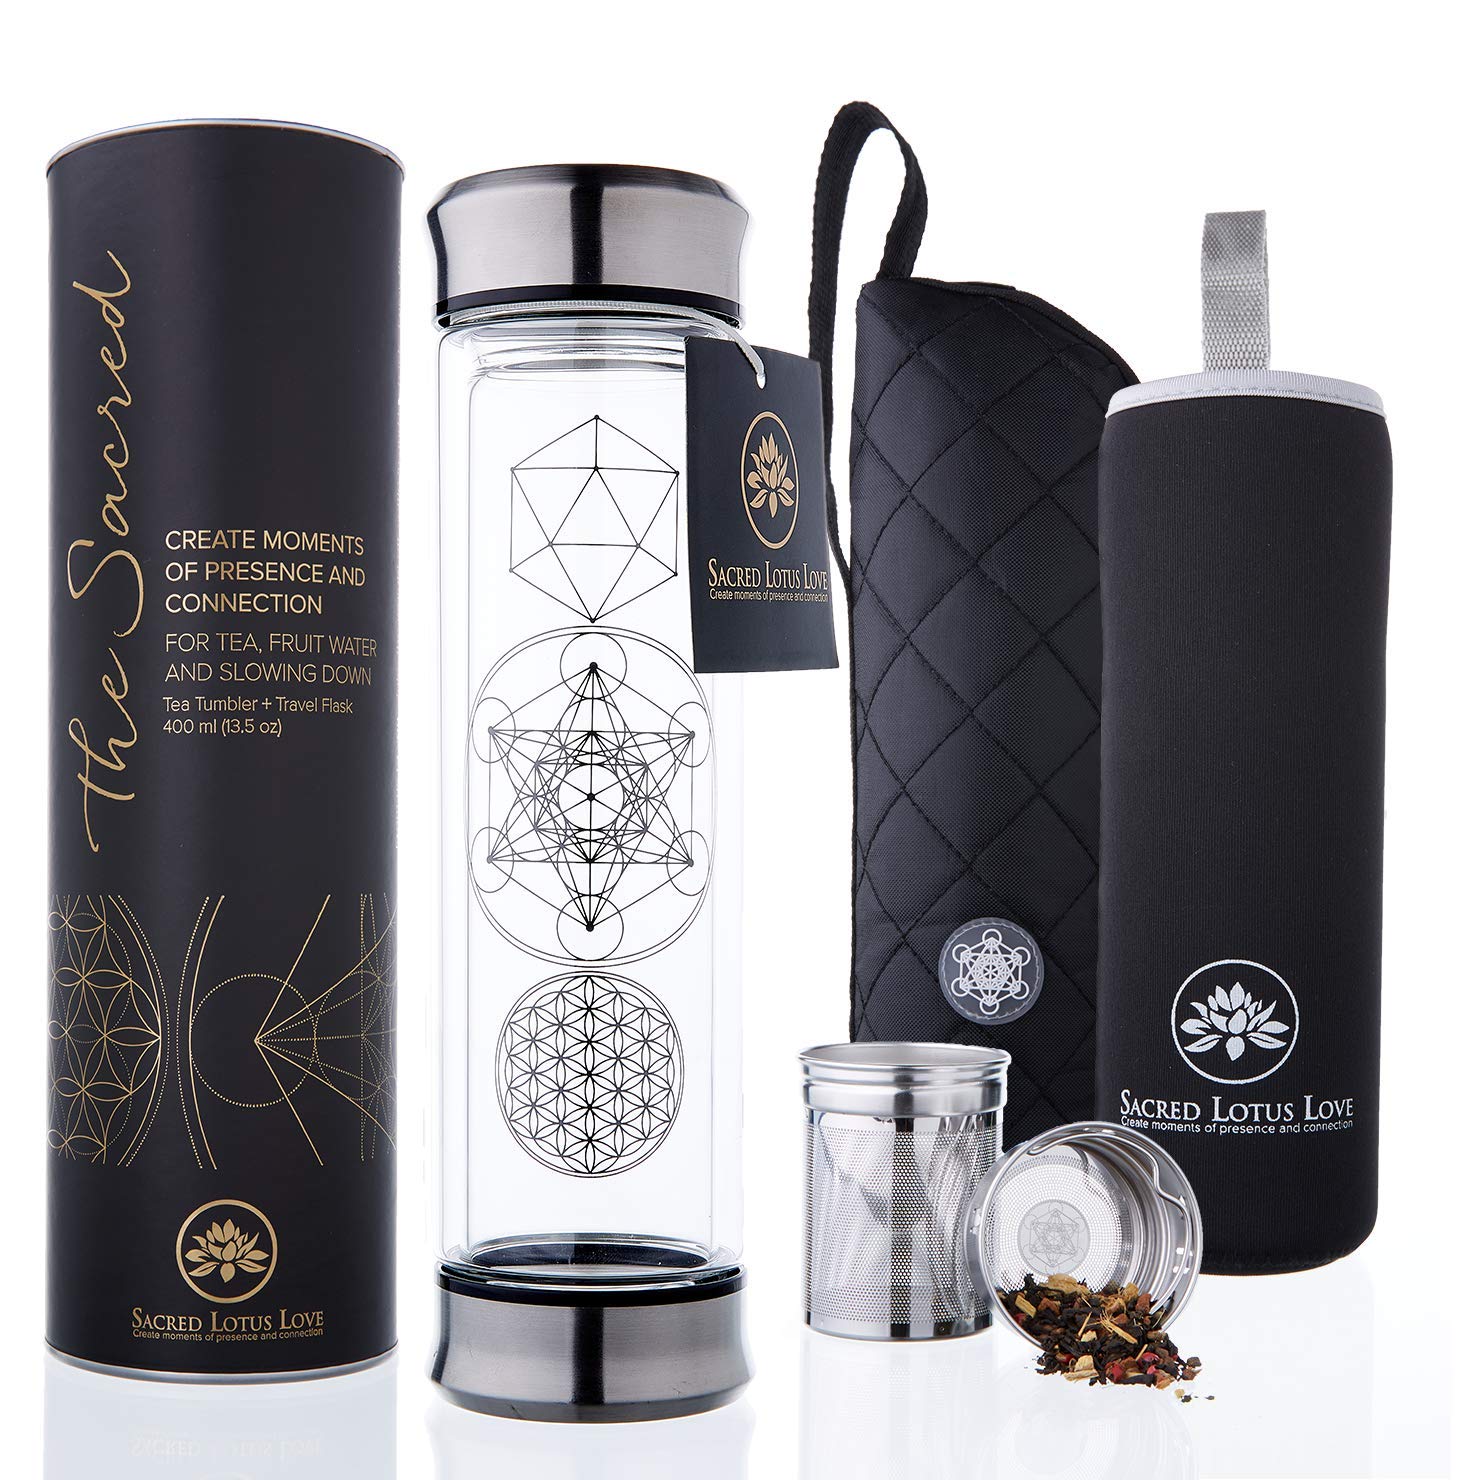 5 Excellent Tea Tumblers for Travelling with Loose Leaf - The Cup of Life